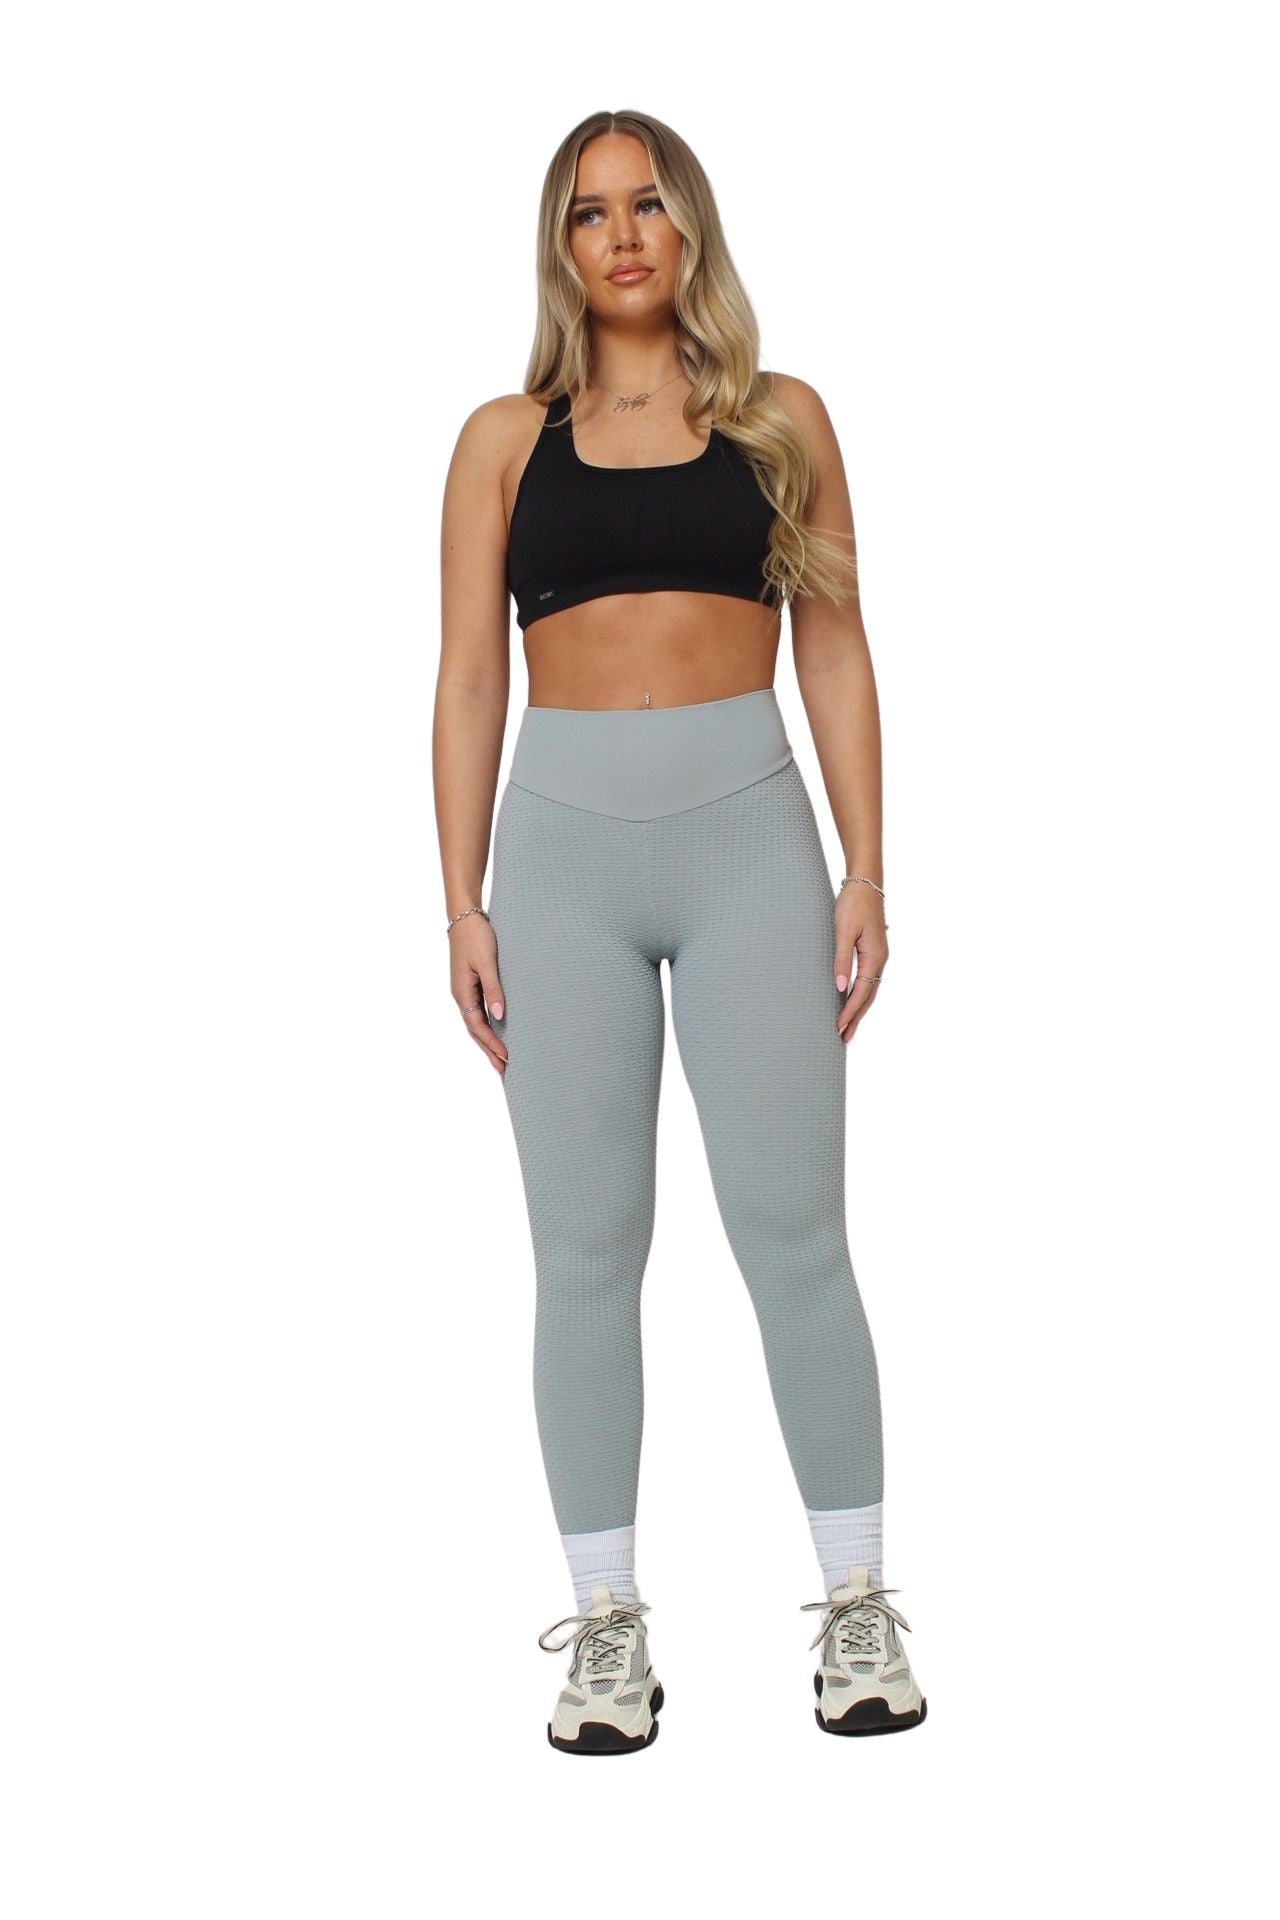 Confetti Collection - Light Pink Ruched Scrunch Bum Gym Leggings